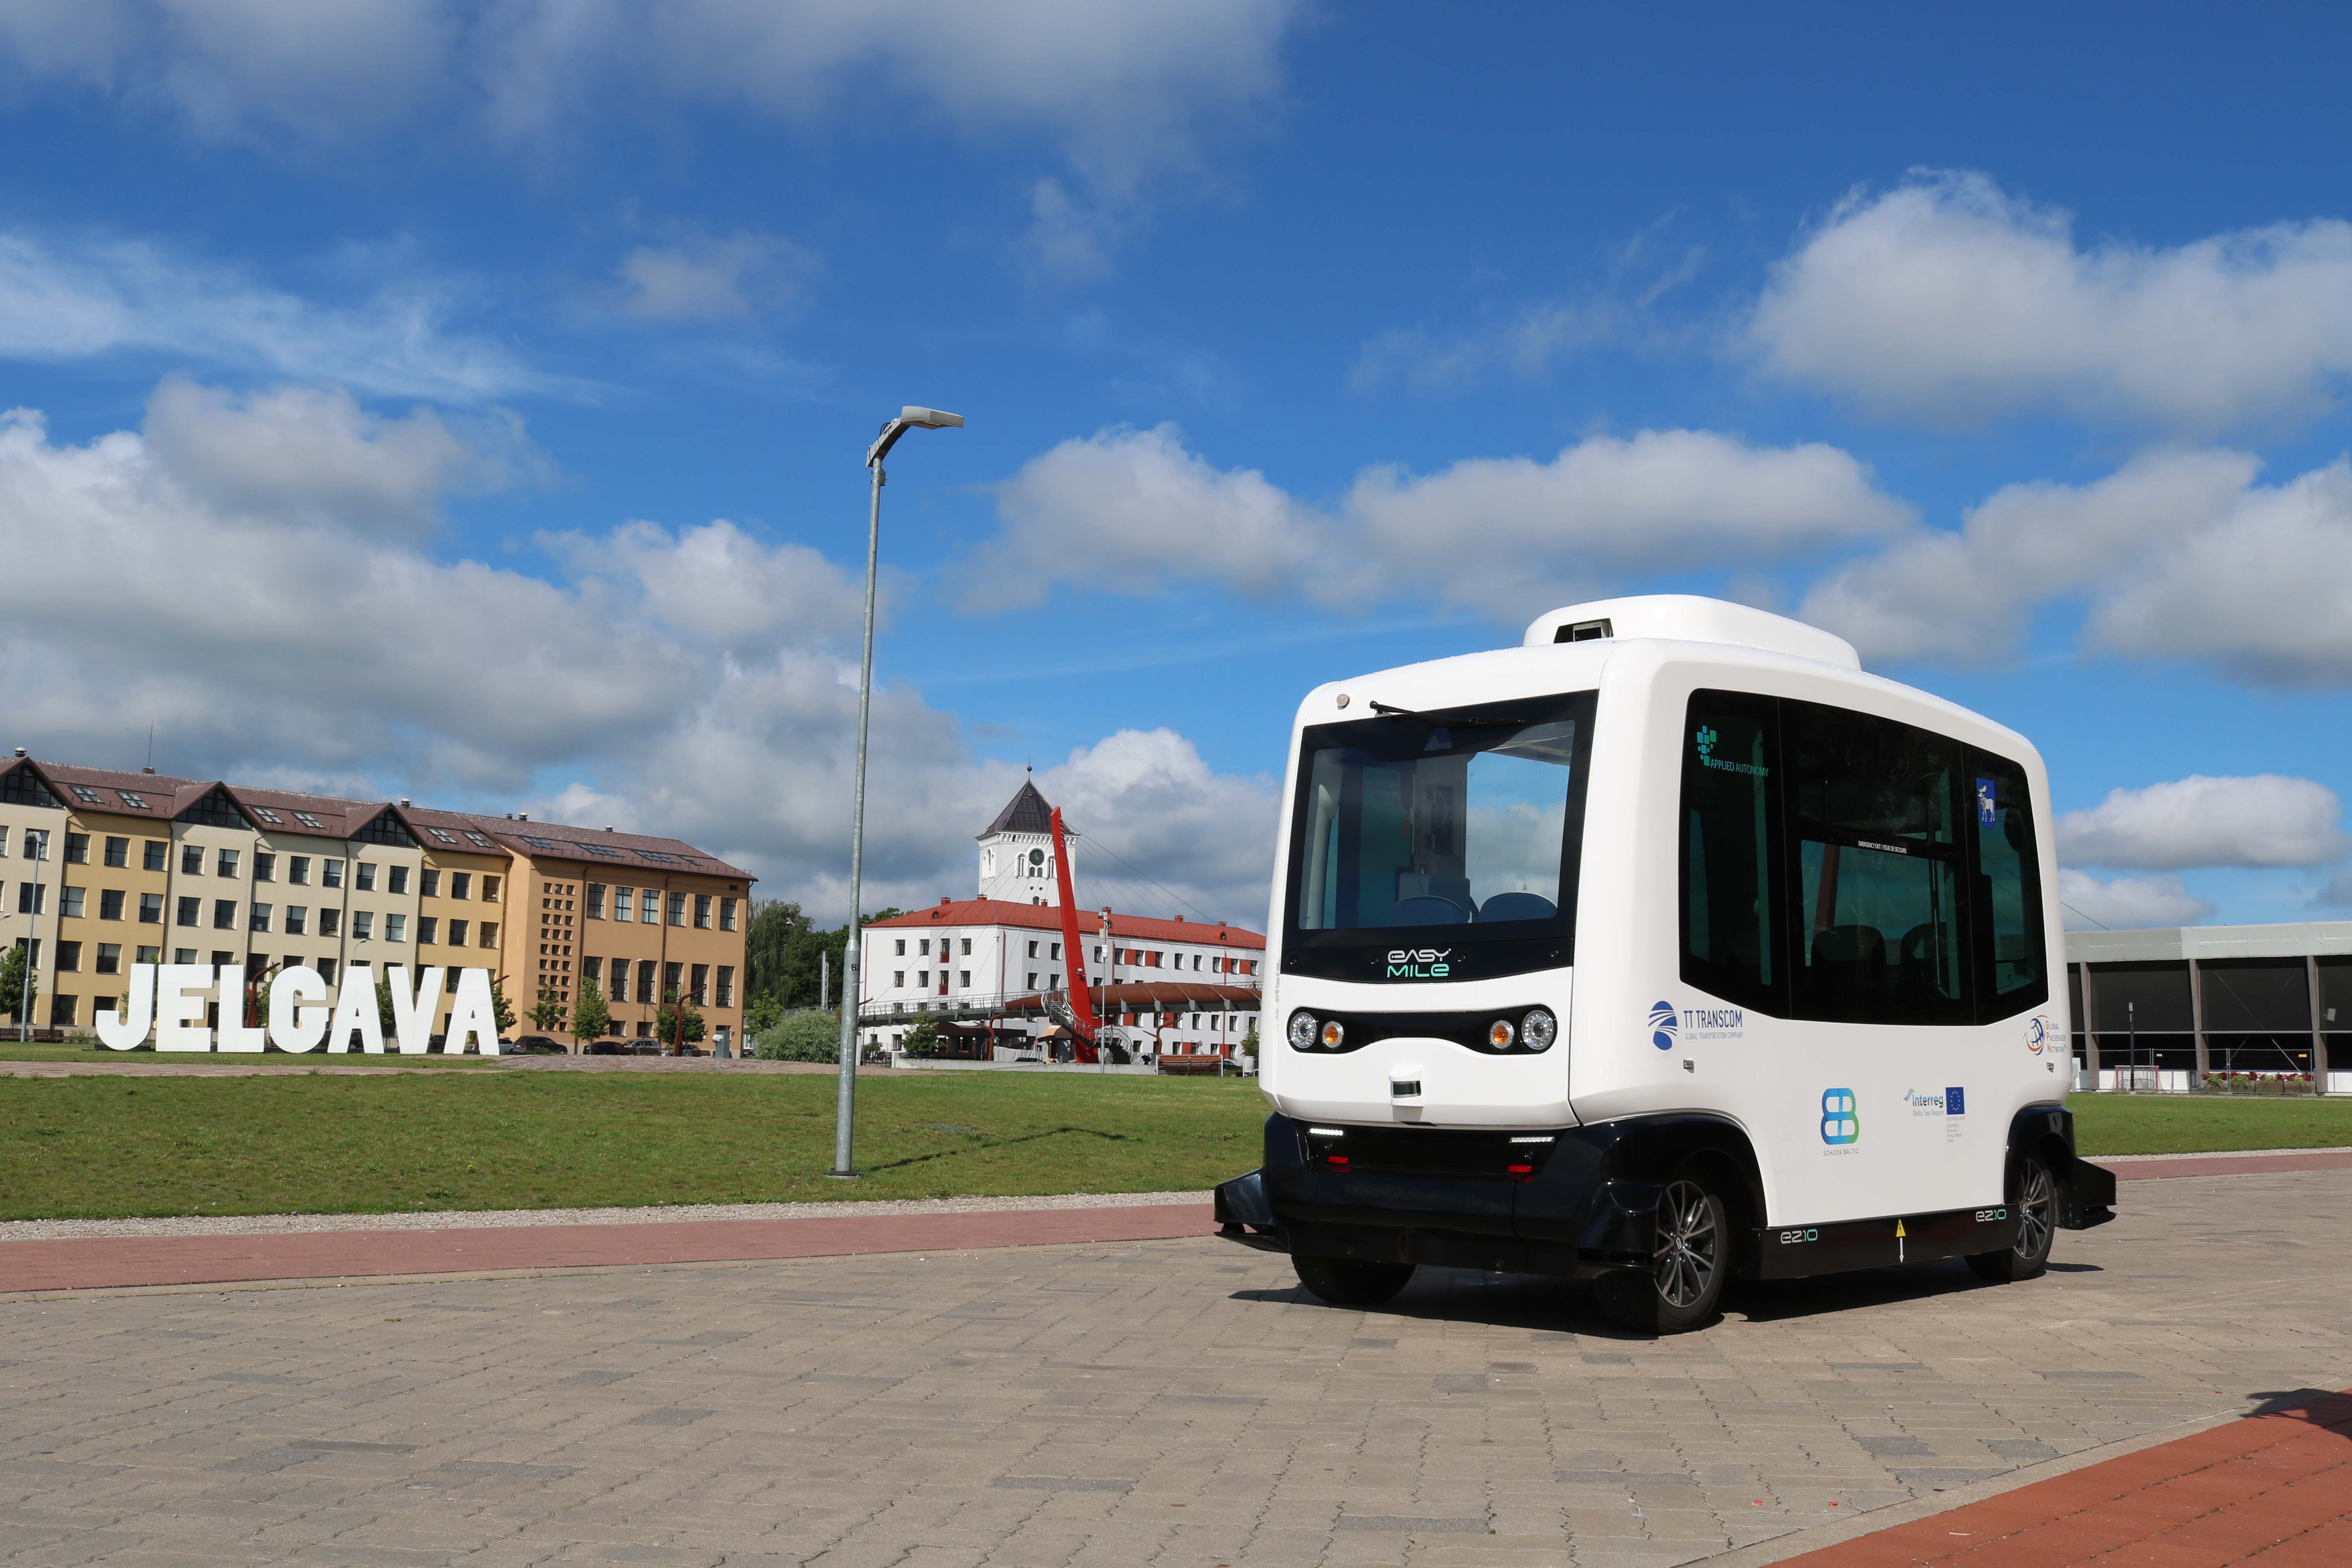 [NEWS] A driverless electrical bus runs in Zemgale